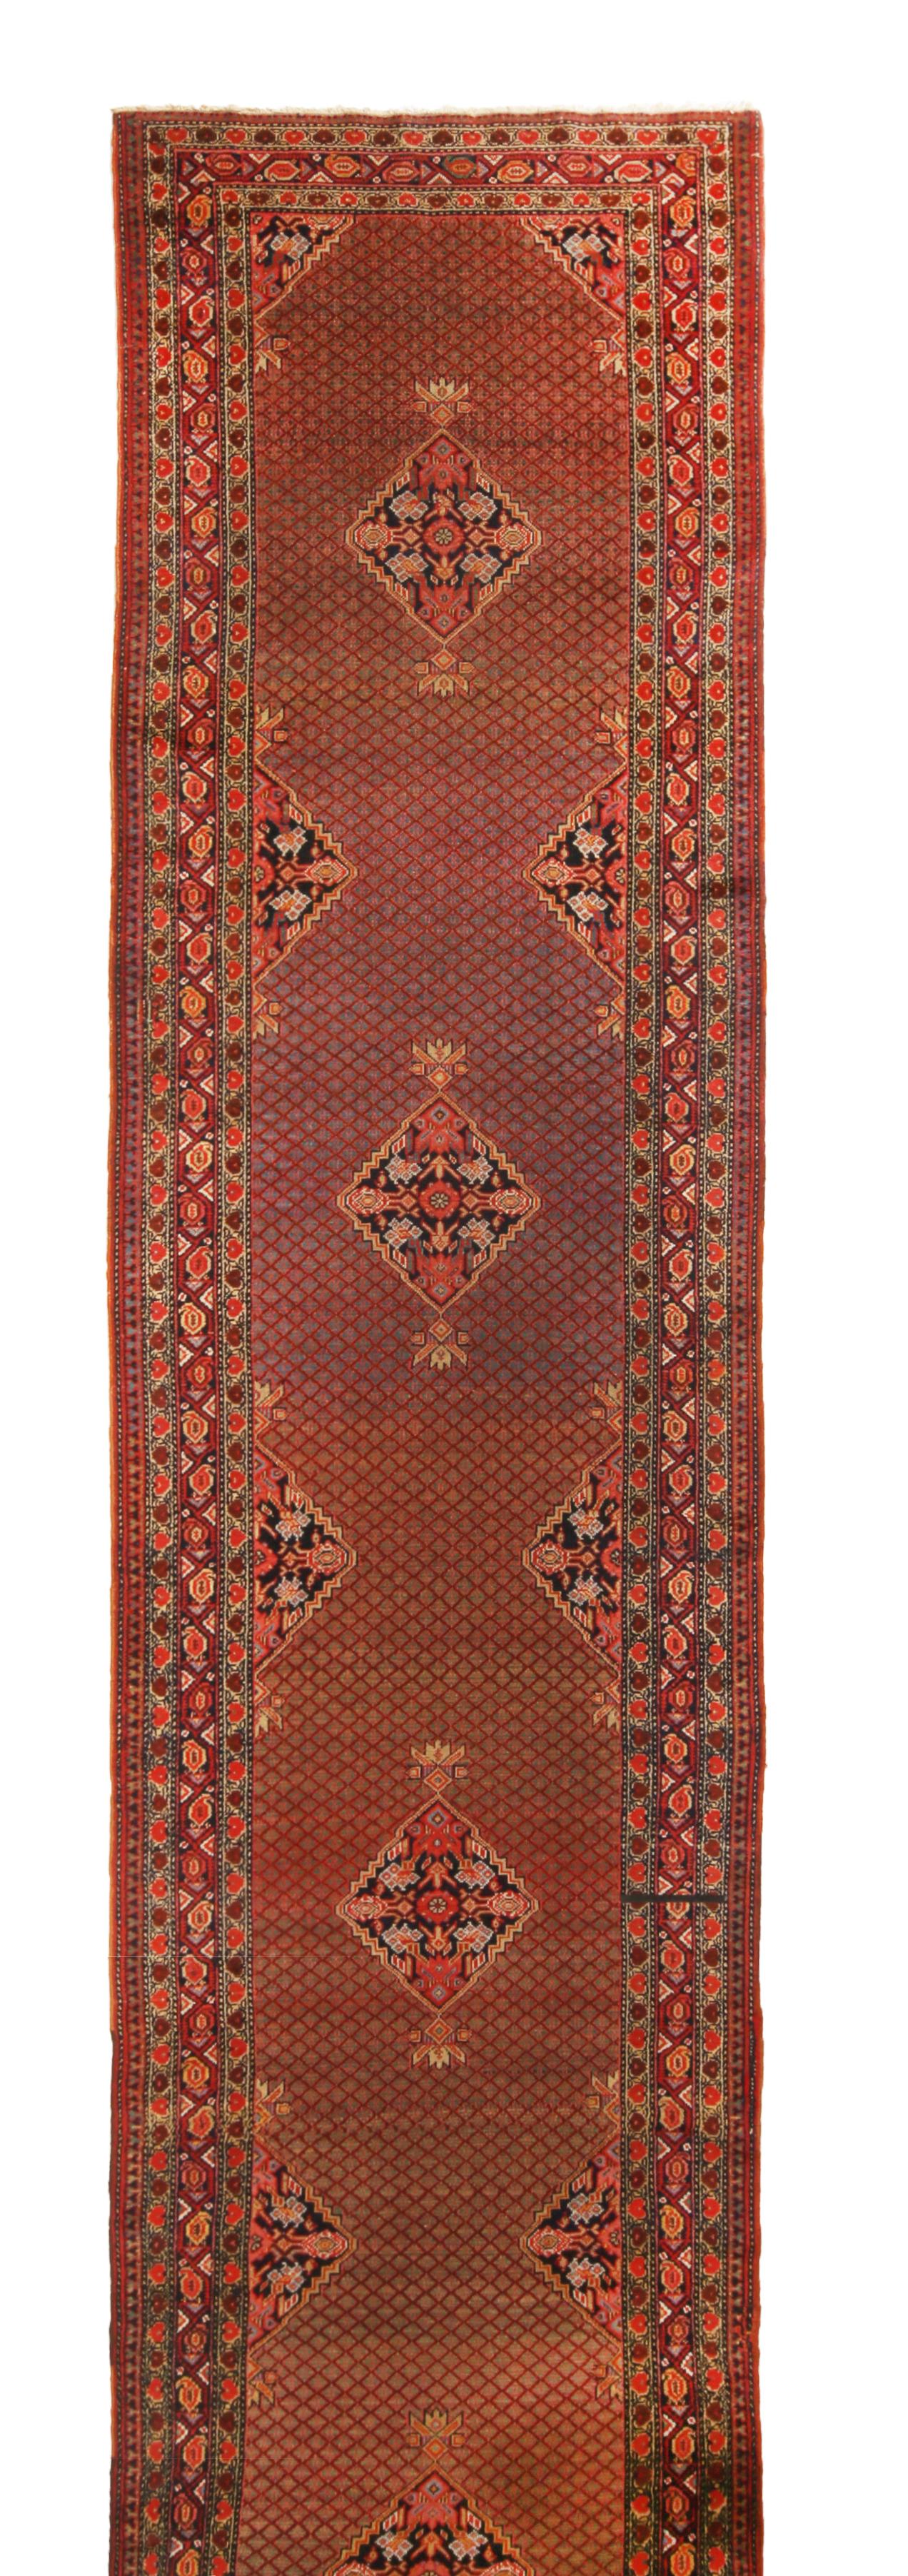 Originating from Persia between 1890-1900, this antique geometric-floral Persian runner is hand knotted in high-quality wool with distinct attention to a marriage of medallion and all-over field designs. The rich and varied portrait of rustic red